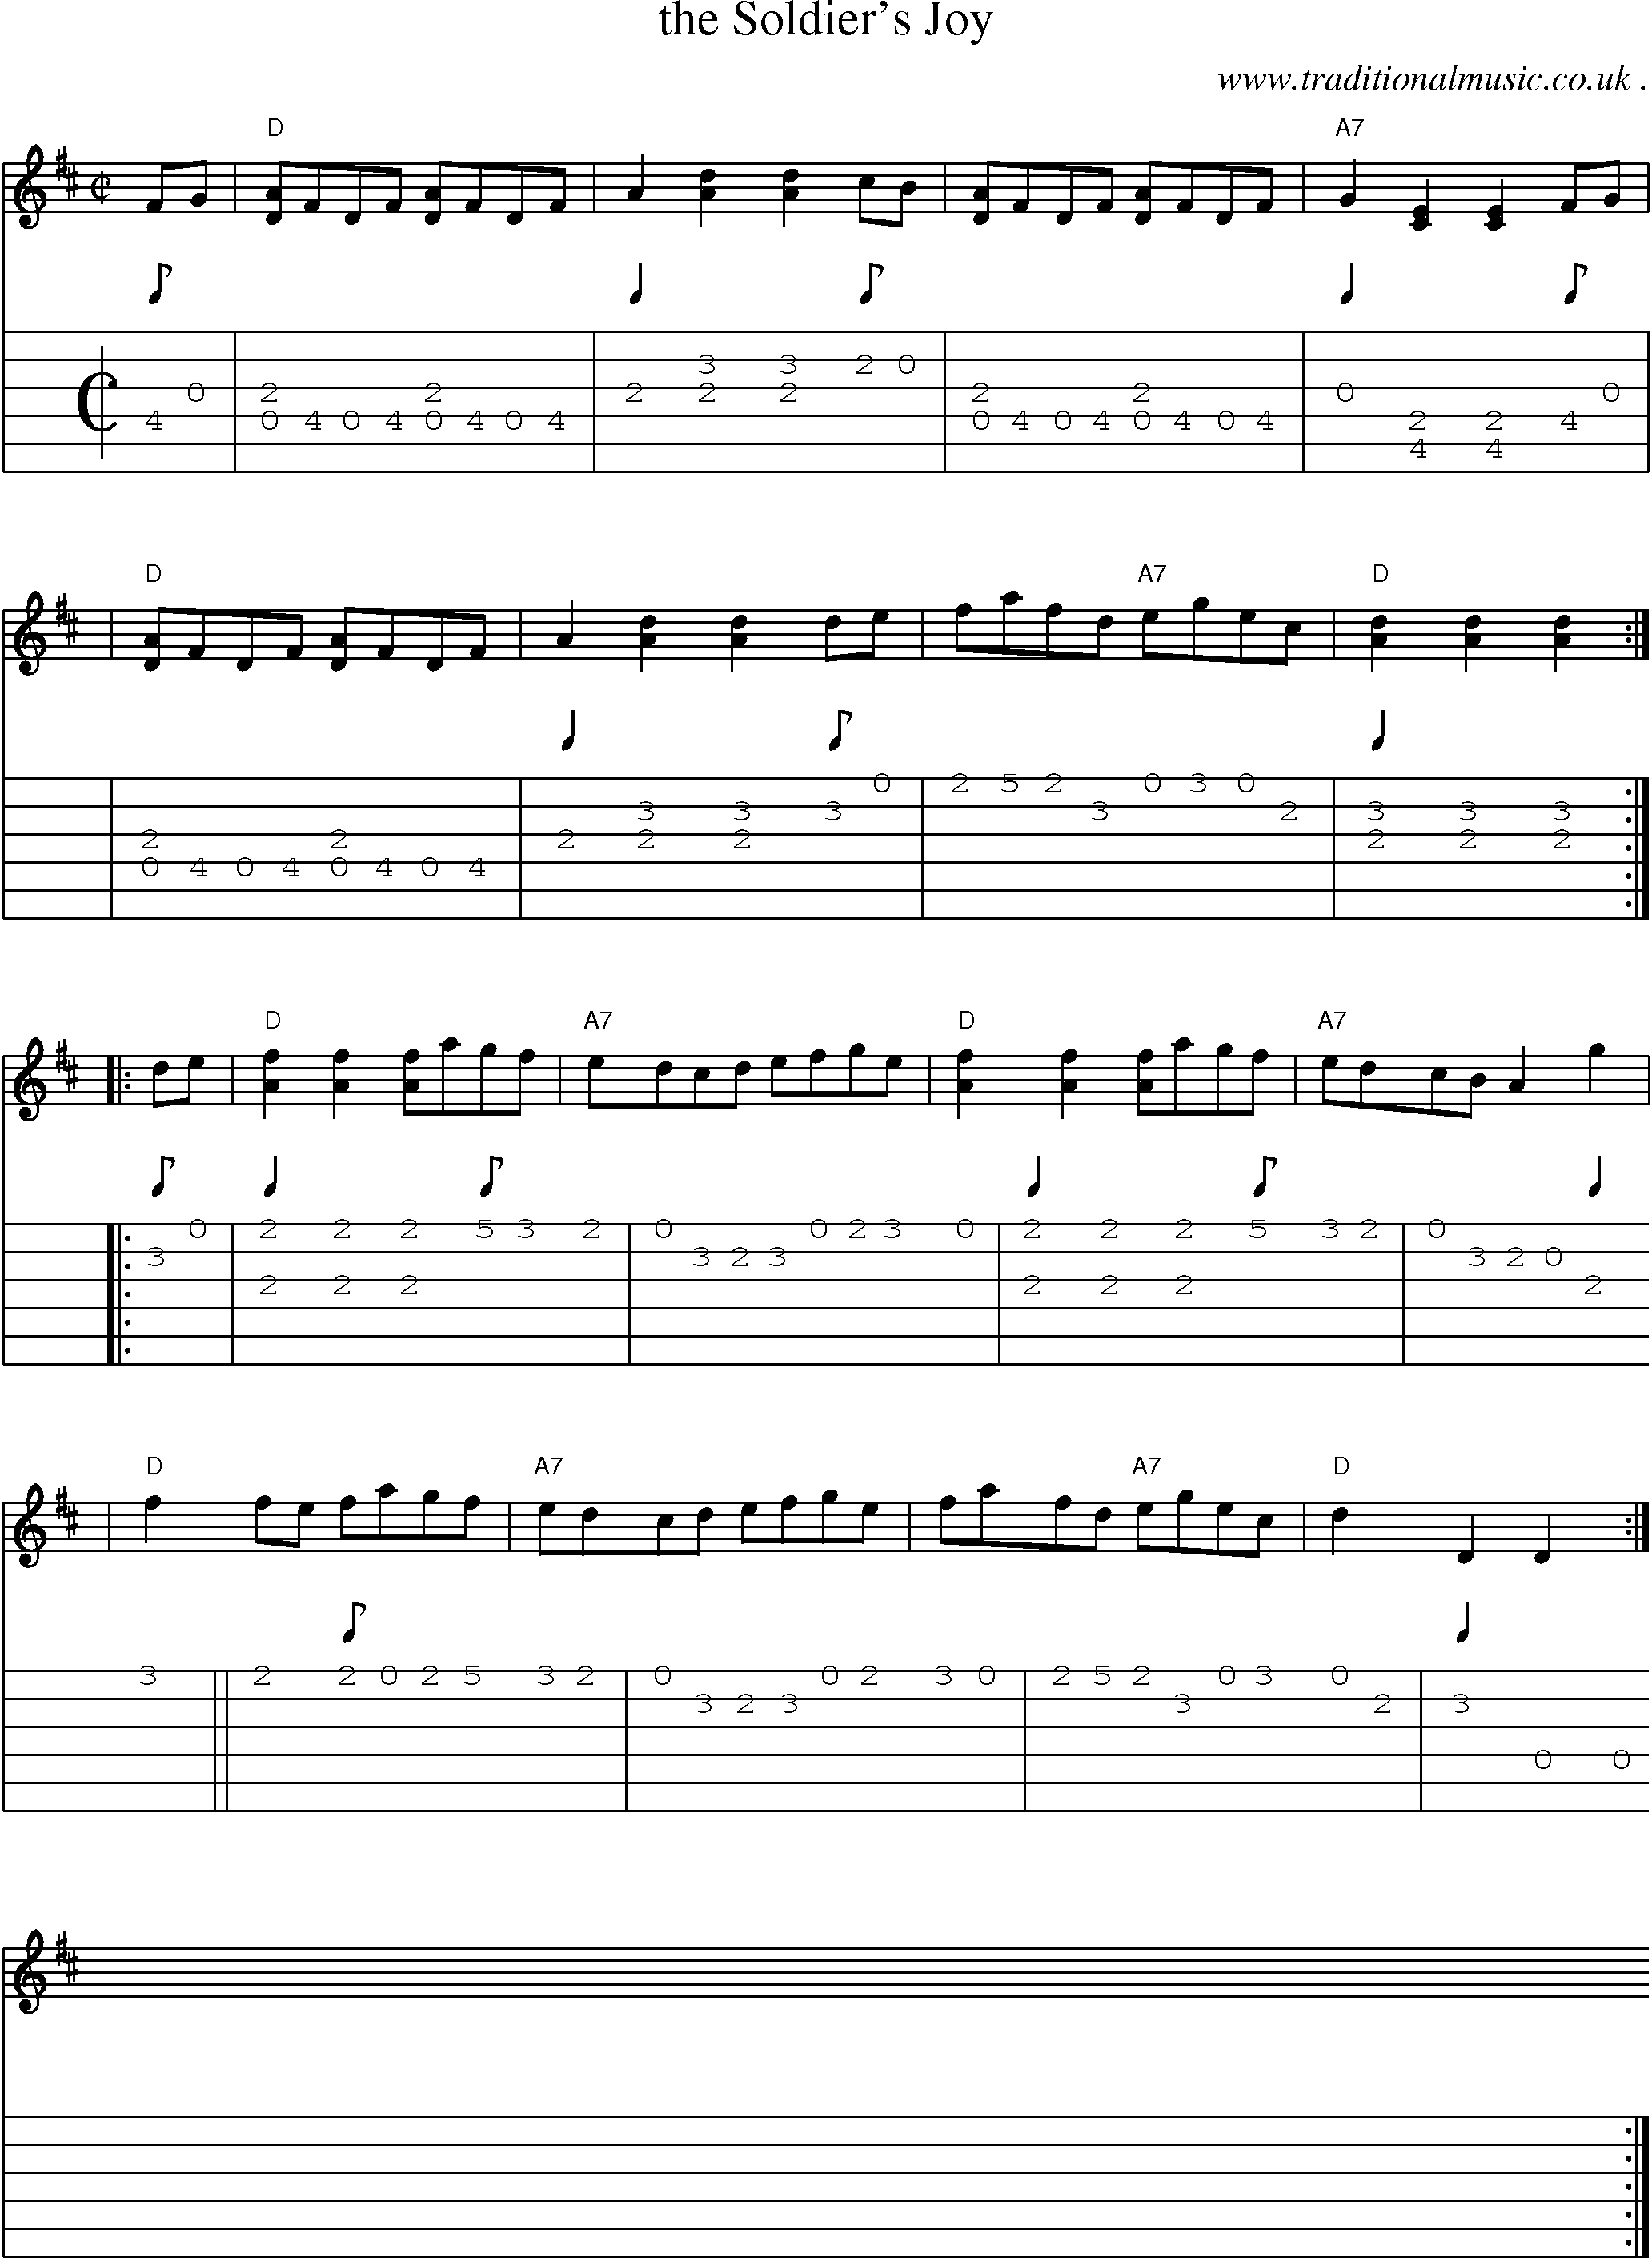 Sheet-music  score, Chords and Guitar Tabs for The Soldiers Joy